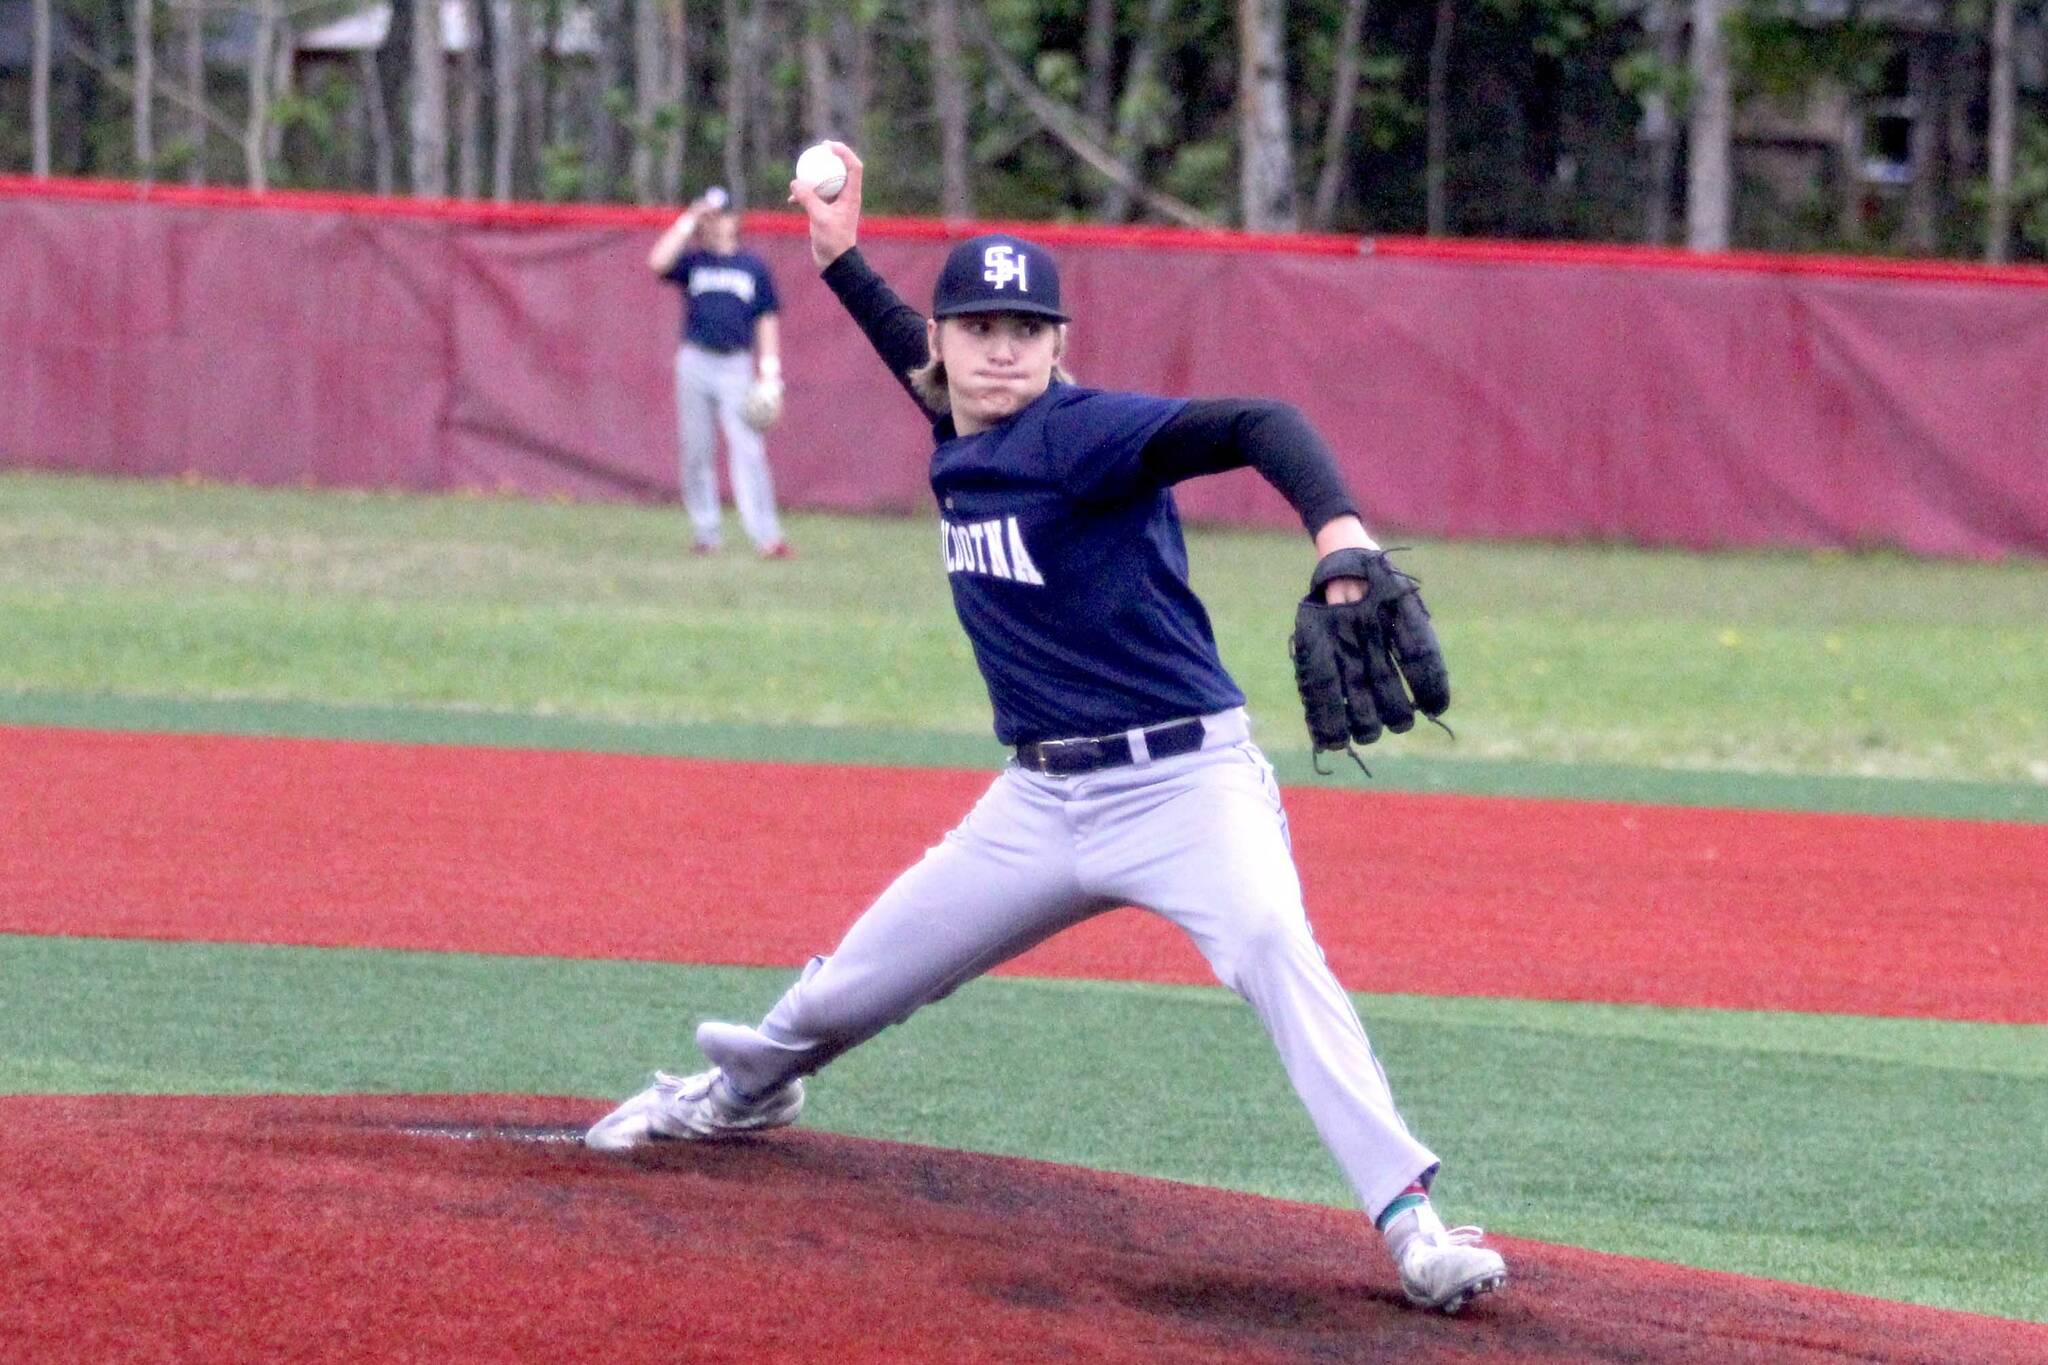 Soldotna's Trenton Ohnemus fires a pitch against the Palmer Moose during the Division II state quarterfinal game Thursday, June 1, 2023, at Wasilla High School. (Jeremiah Bartz/Frontiersman)